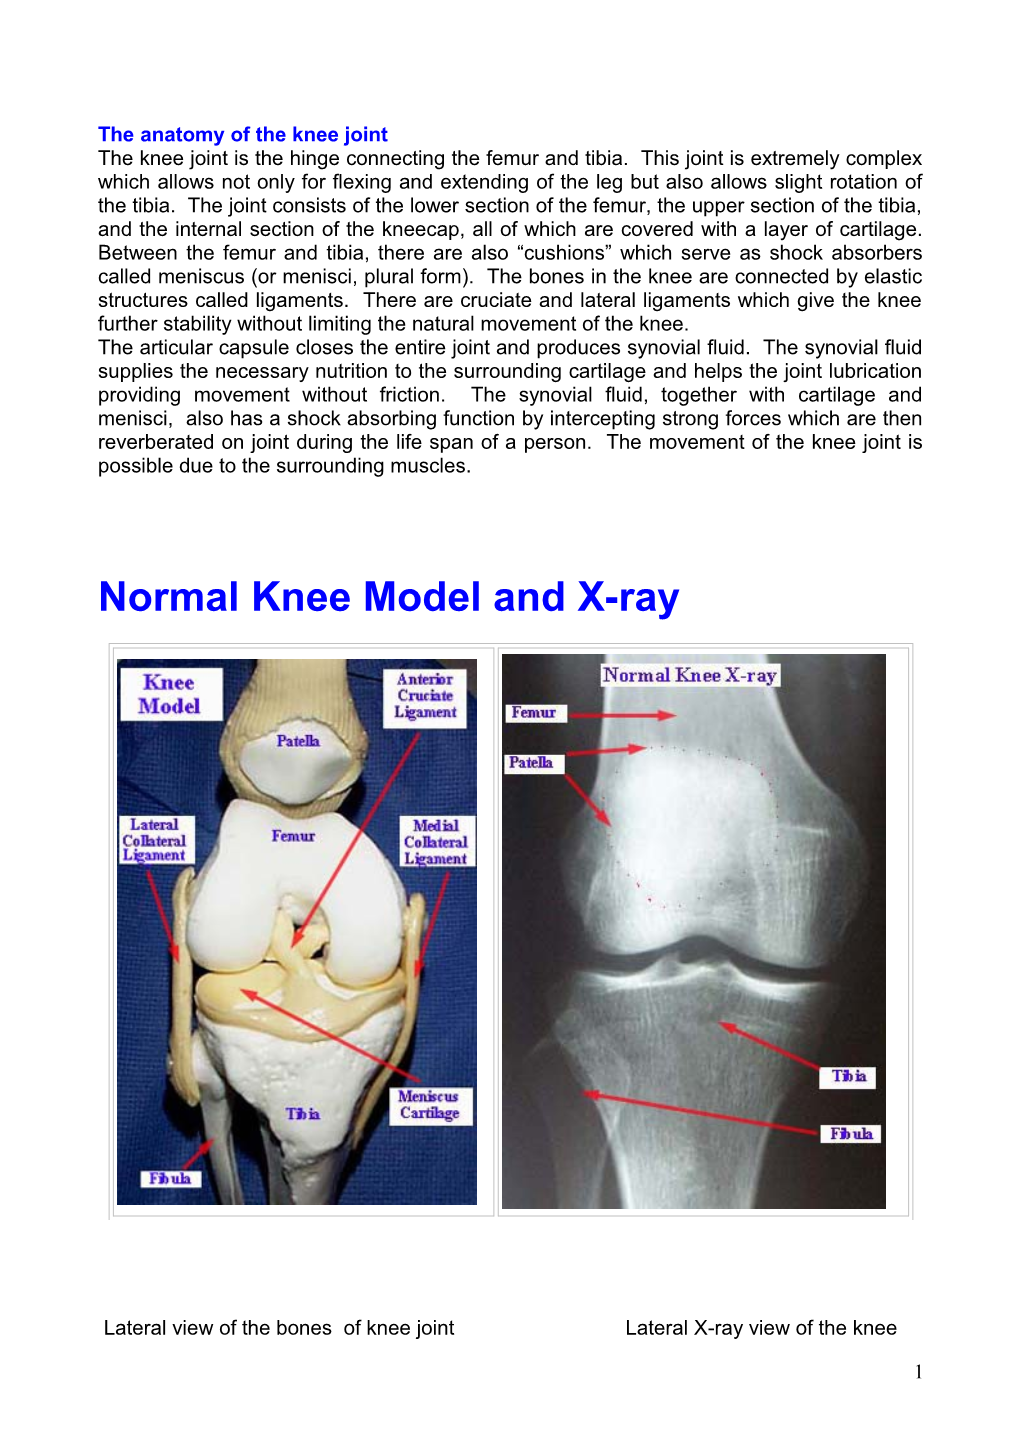 Disorders of the Patellofemoral Joint Are a Common Cause of Knee Pain Throughout Adult Life